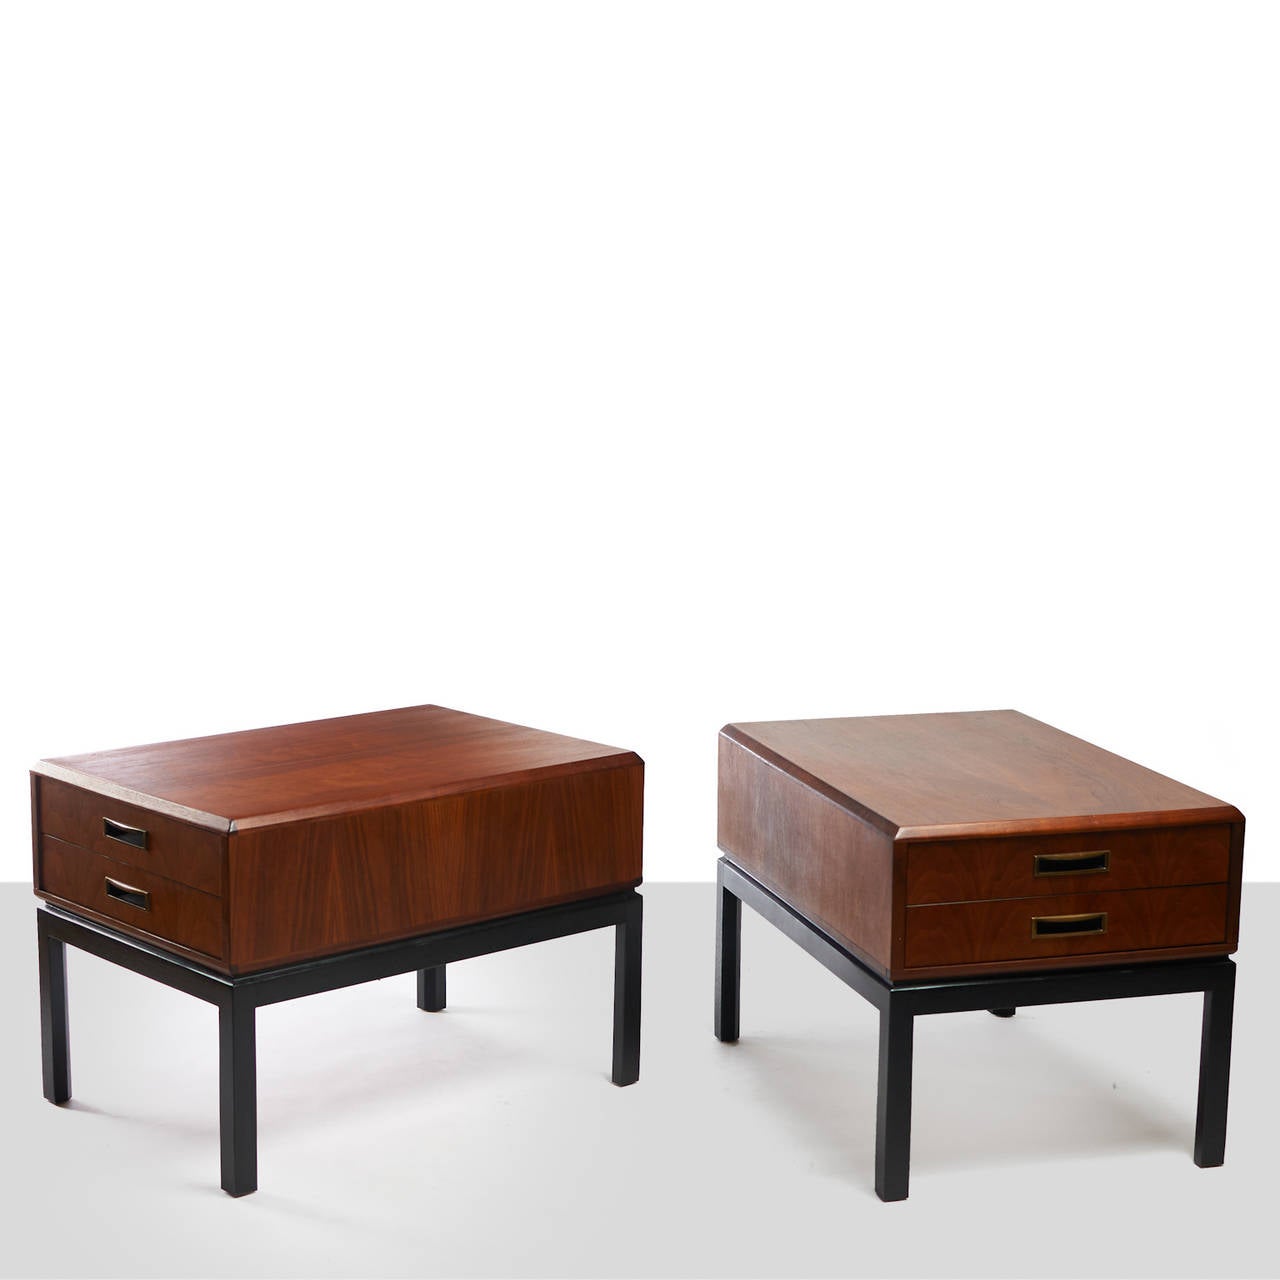 A pair of two toned walnut night stands in the style of Harvey Probber. Both feature ebonized legs, eased edges, and brass pull details on drawers.